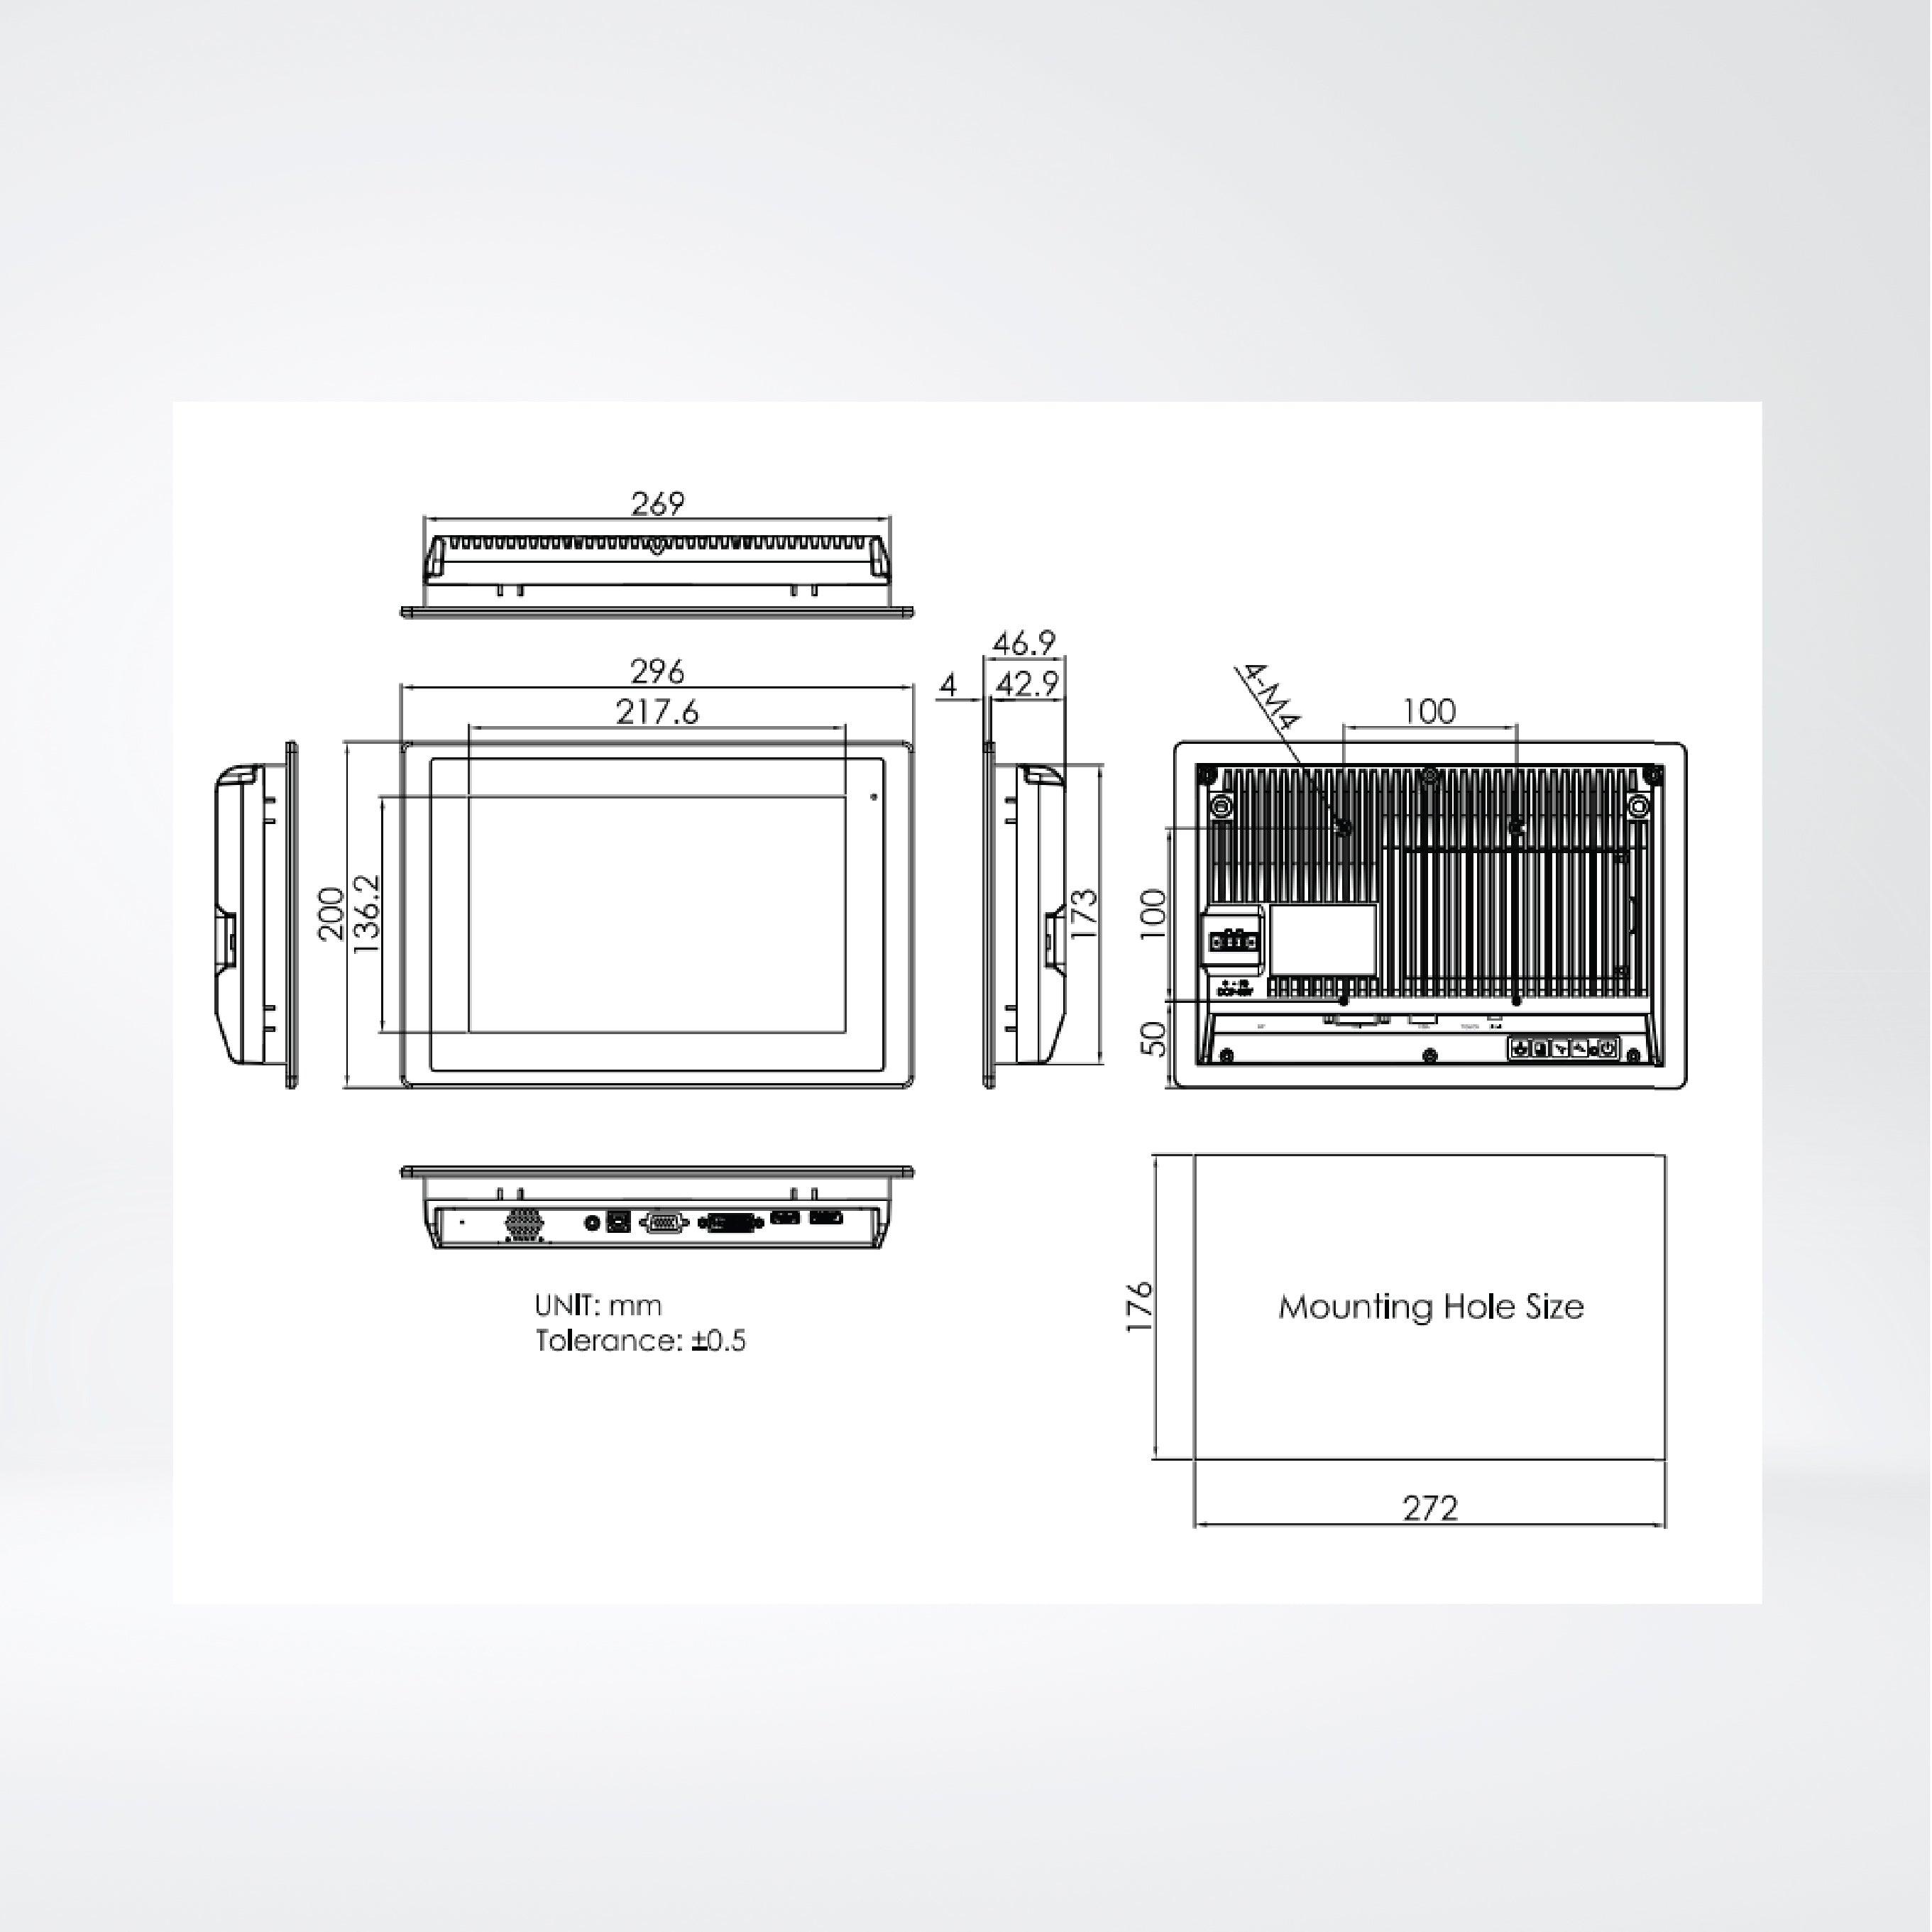 FABS-110RH 10.1” Flat Front Panel IP66 Stainless Chassis Display - Riverplus